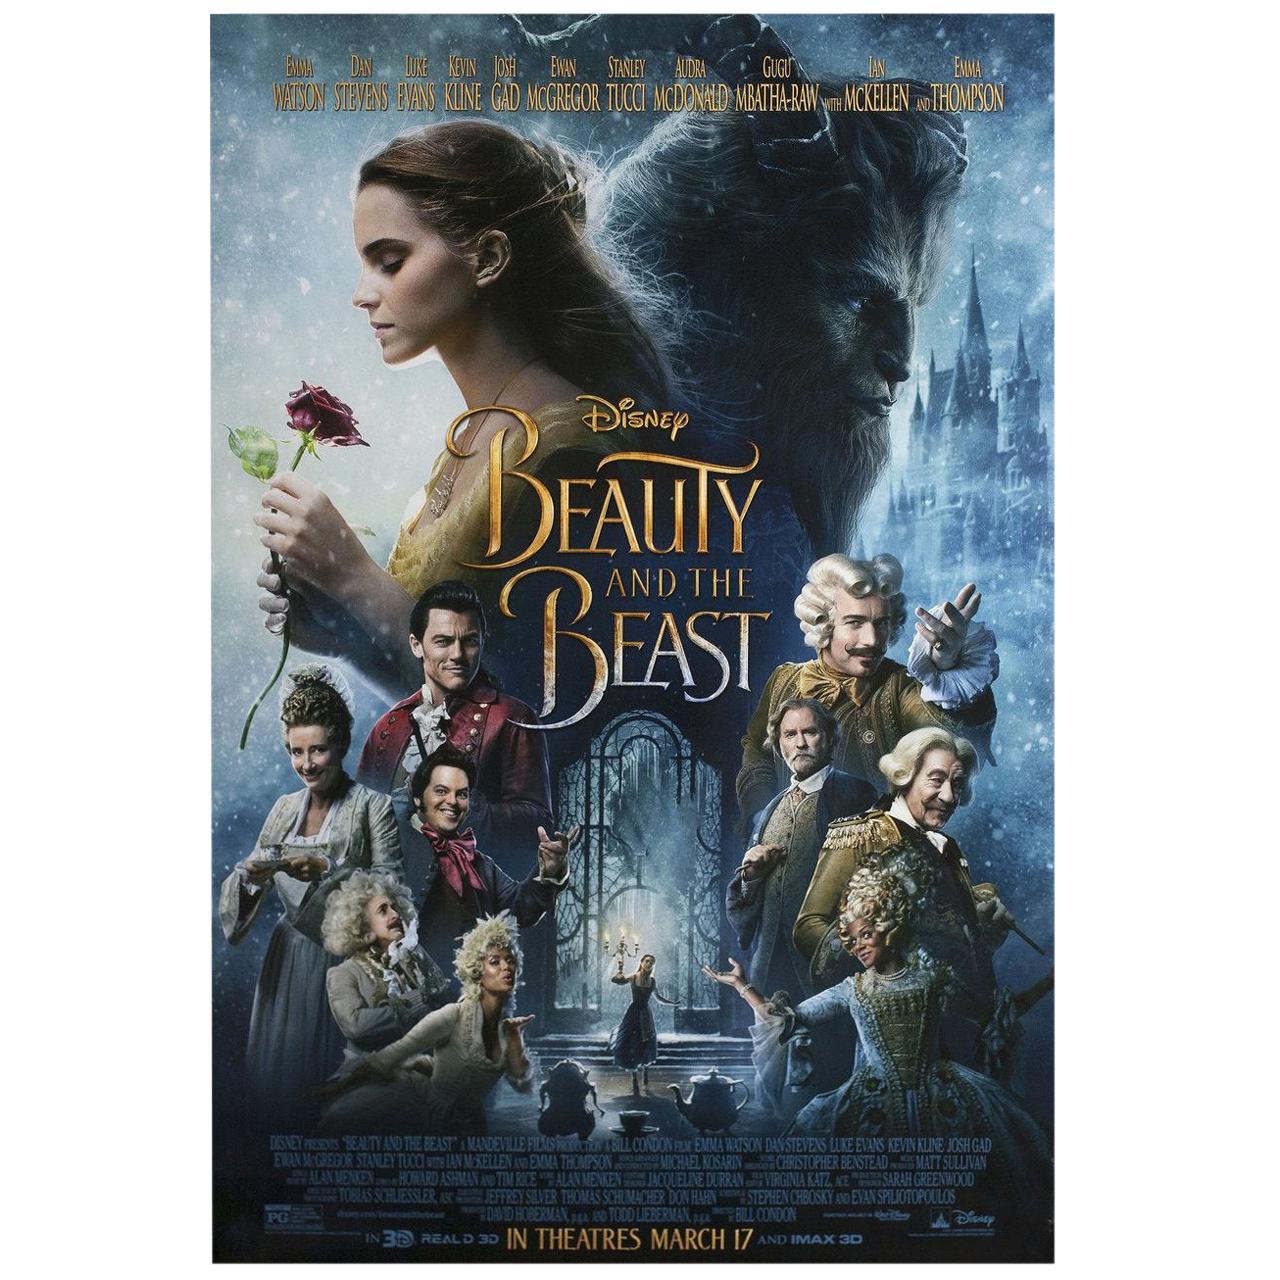 "Beauty and the Beast" 2017 U.S. One Sheet Film Poster